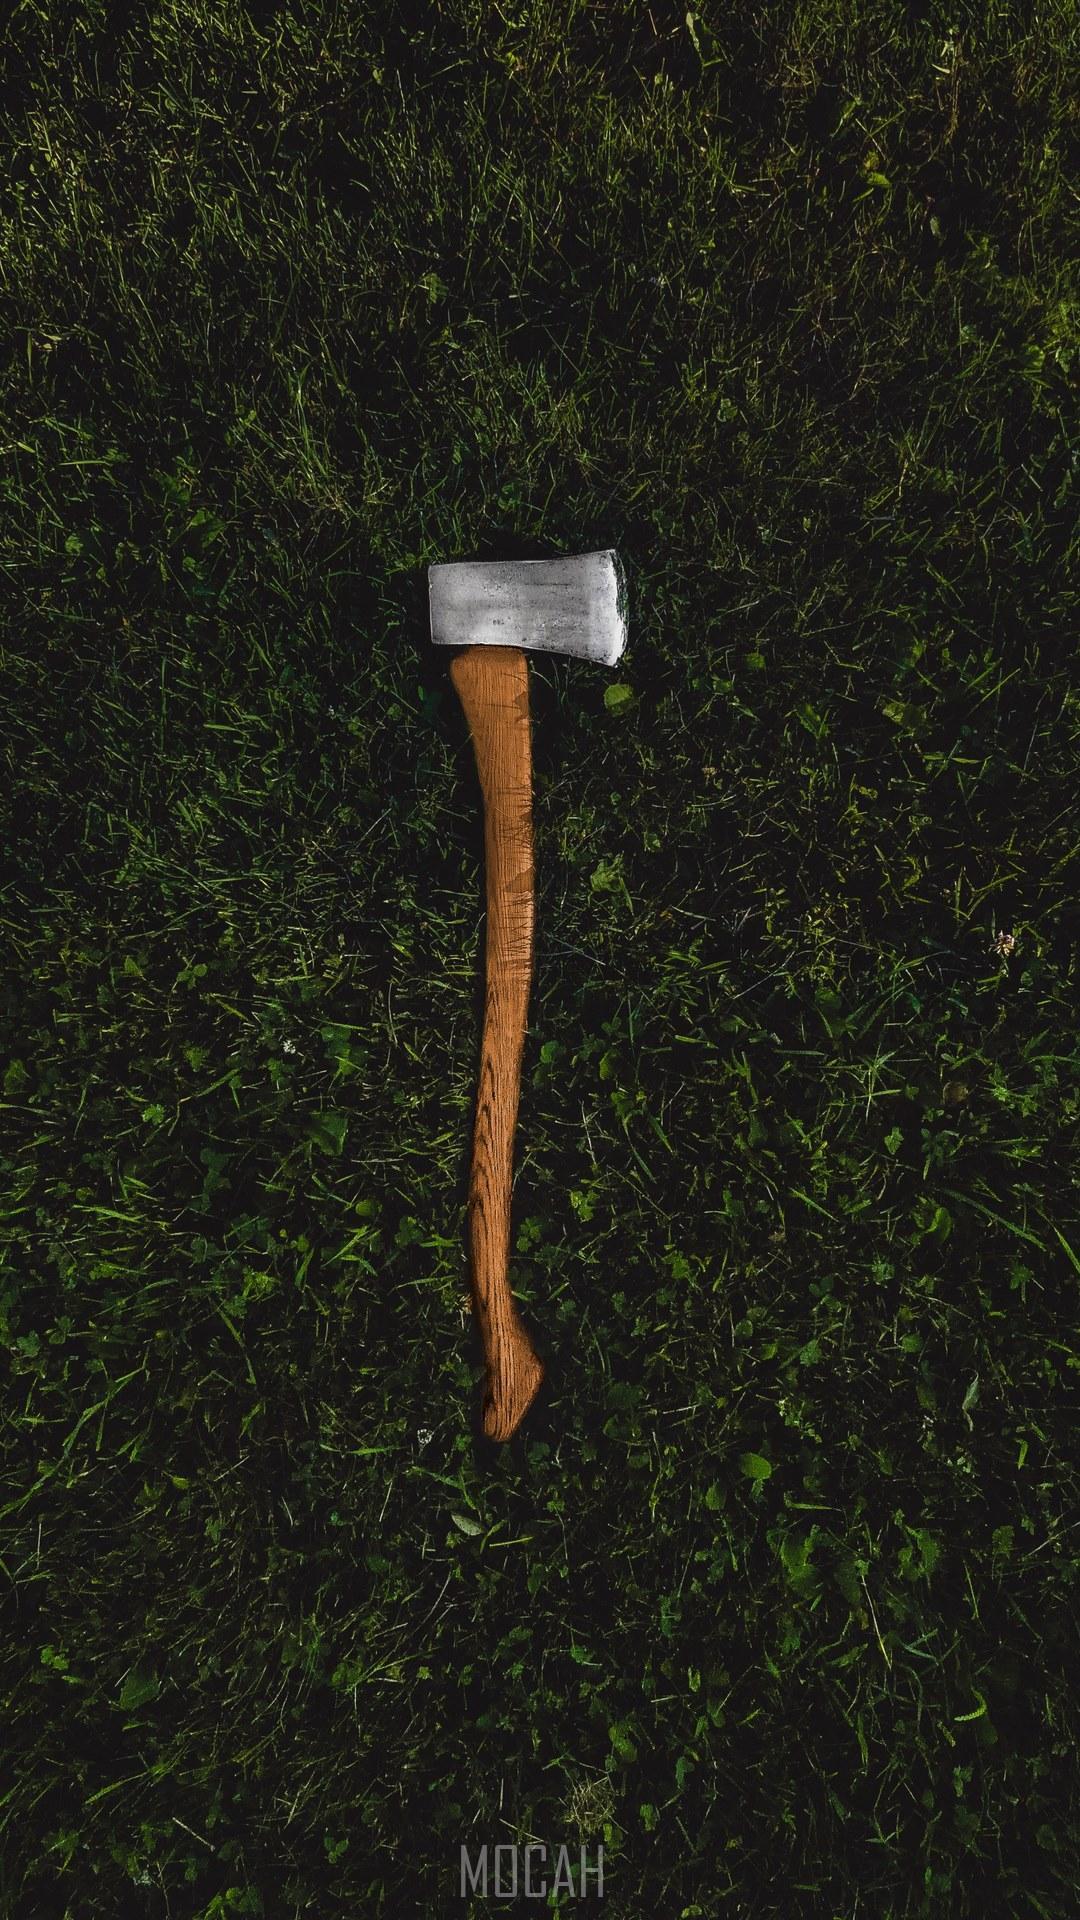 HD wallpaper, 1080X1920, Samsung Galaxy Note 3 Wallpaper Full Hd, A Cut Above, A Metal Ax With A Wooden Handle Laid Down In The Middle Of A Grassy Ground